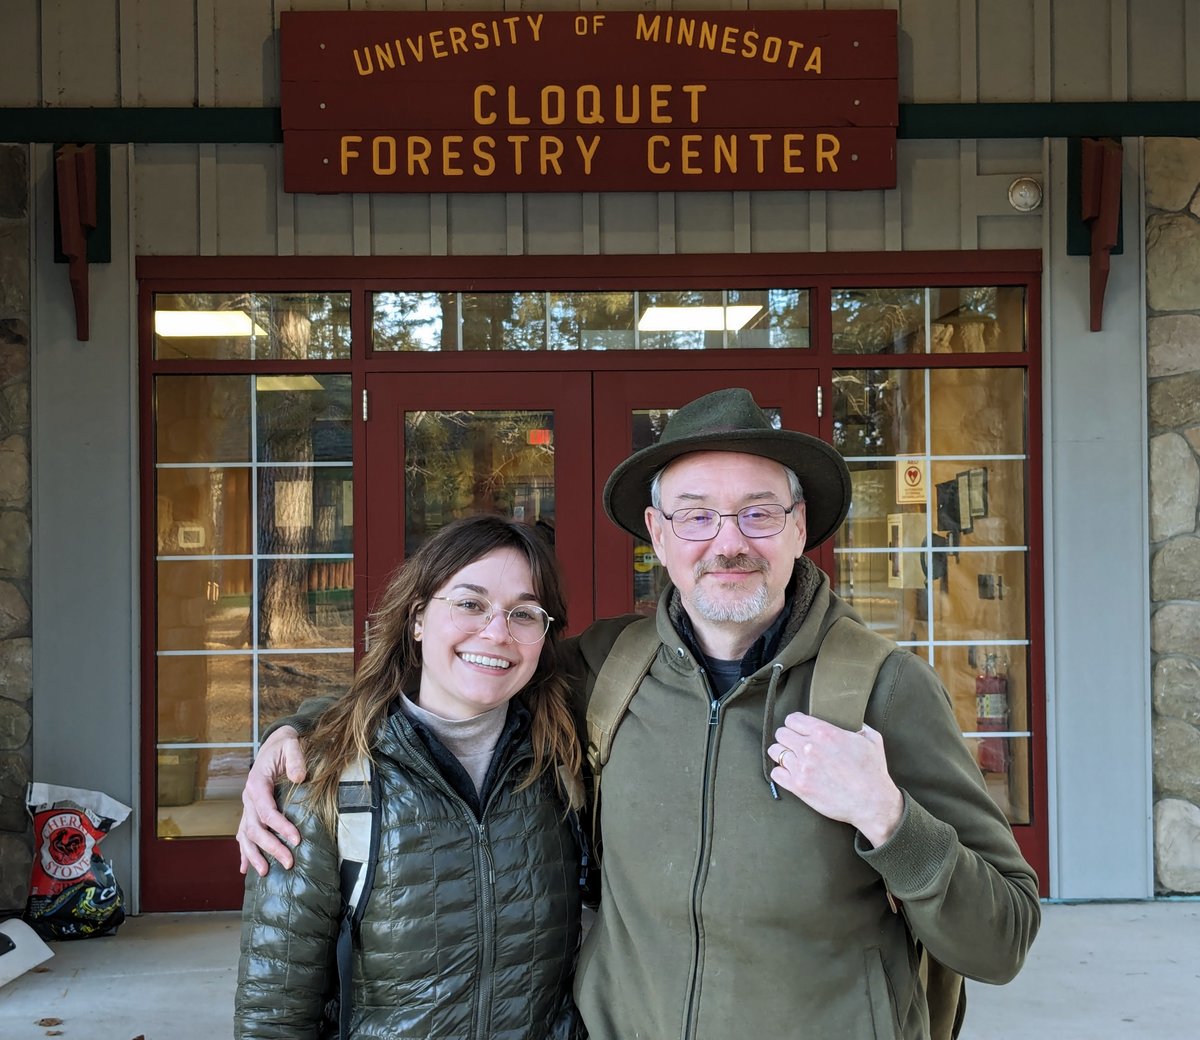 students Rose Picklo and Matt Picklo outside Cloquet Forestry Center entrance